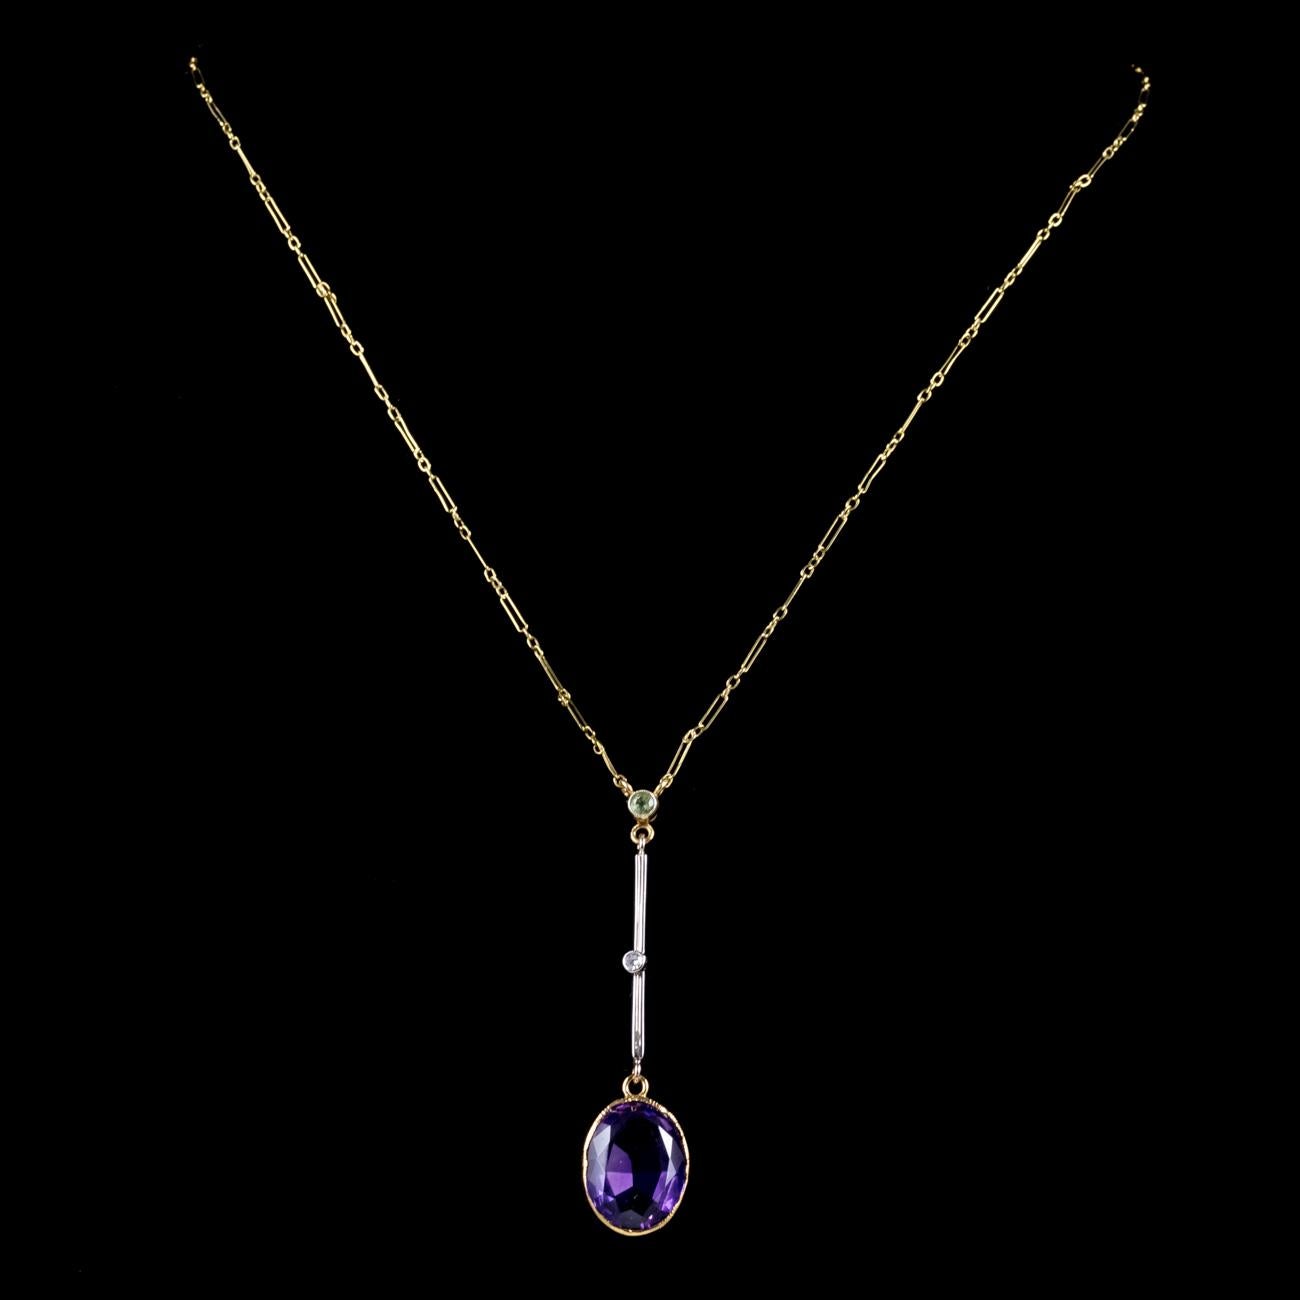 A beautiful antique Victorian Suffragette lavaliere necklace featuring a pendant set with a Peridot, Diamond and a large Amethyst dropper which is approx. 5.5ct. Suffragette jewellery was worn to show one’s allegiance to the women’s Suffragette